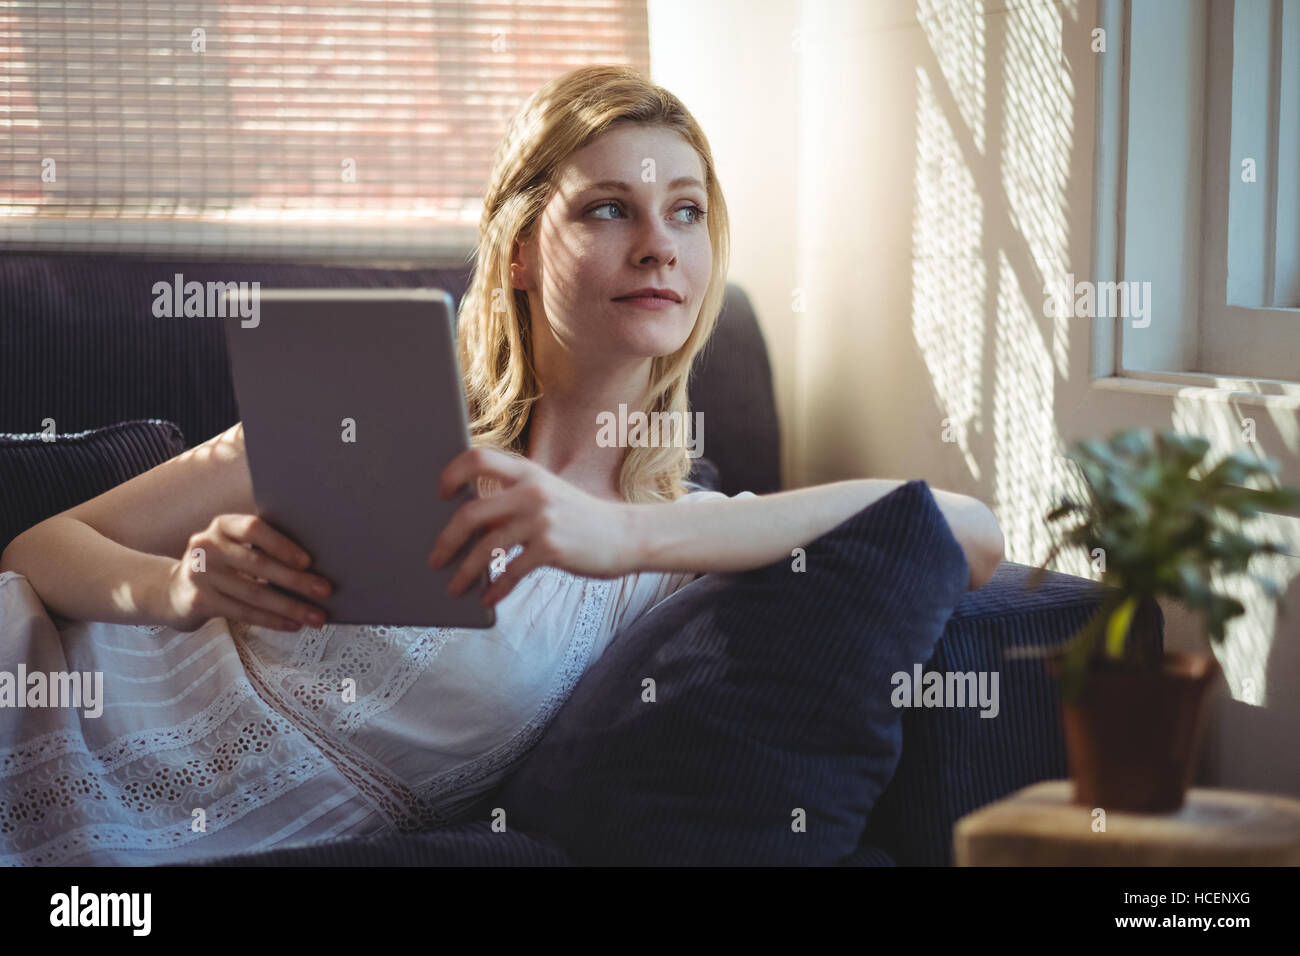 Thoughtful woman lying on sofa and holding digital table in living room Stock Photo